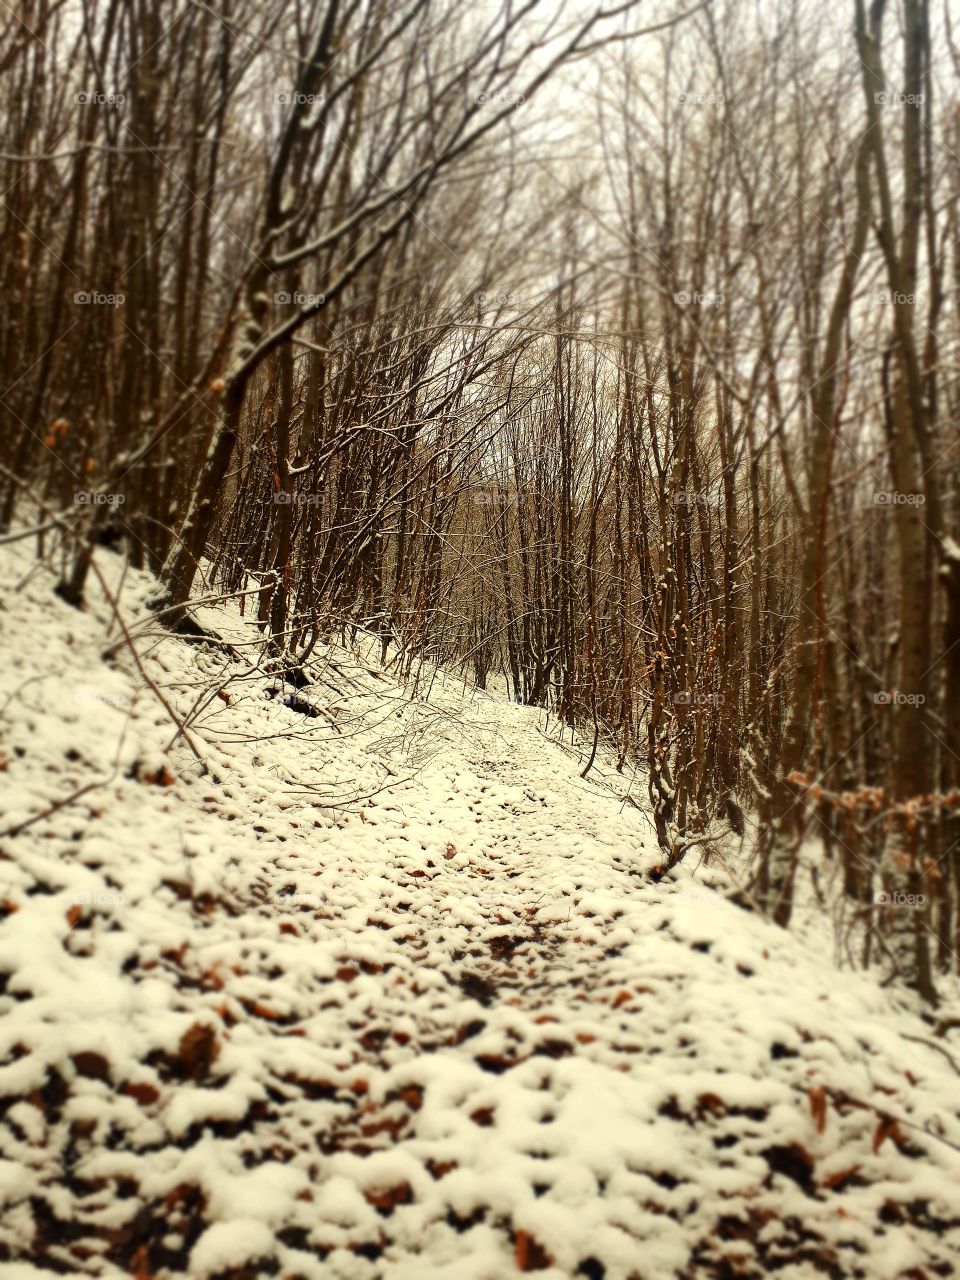 walk through the woods by taking the first snow